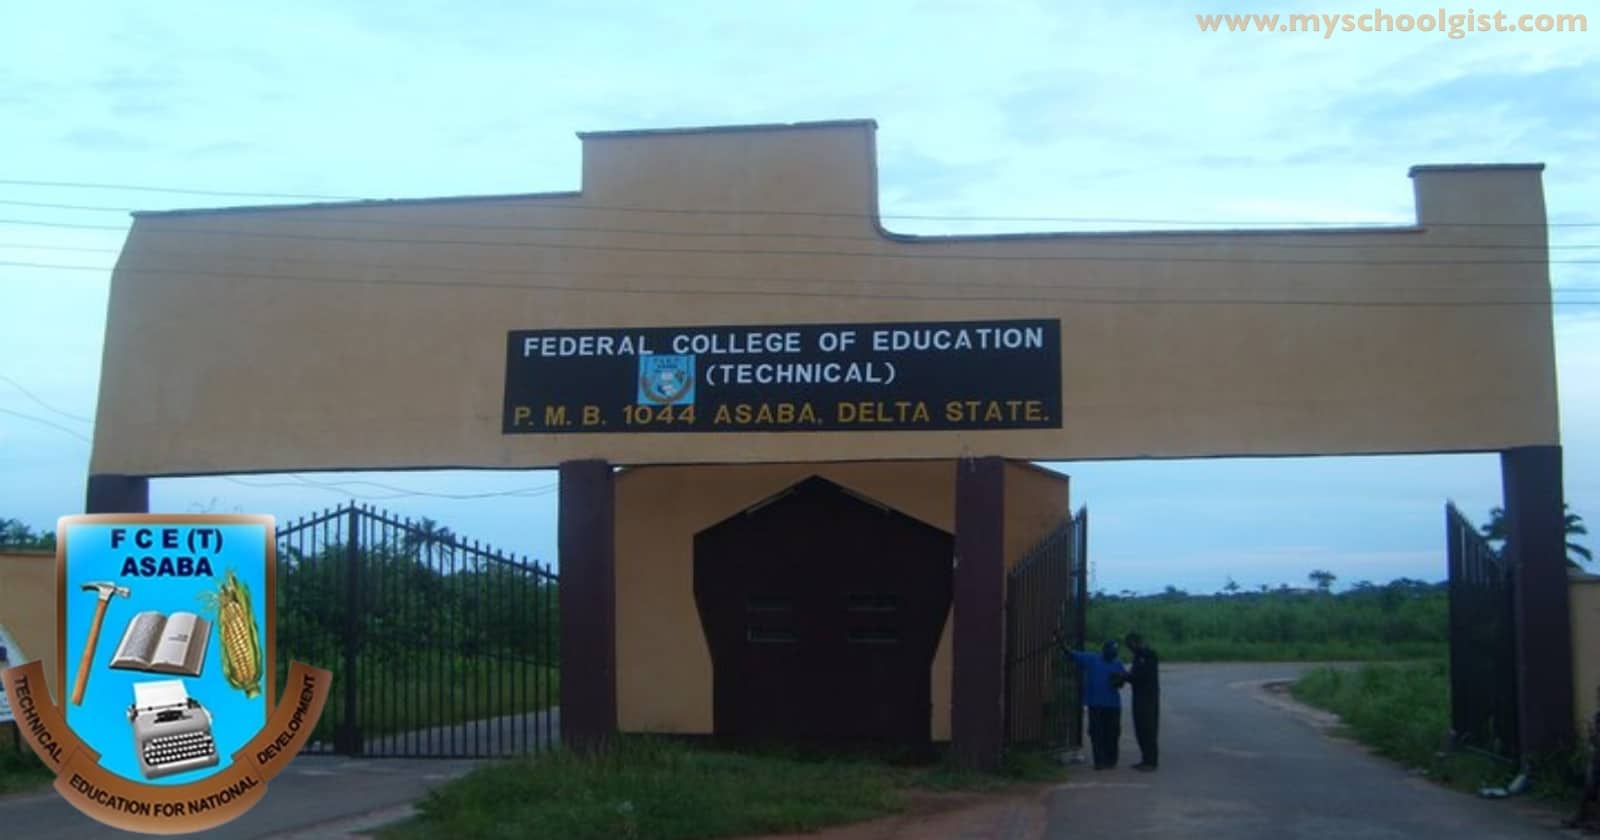 FCE (Technical) Asaba NCE Part-Time Programmes Admission Form